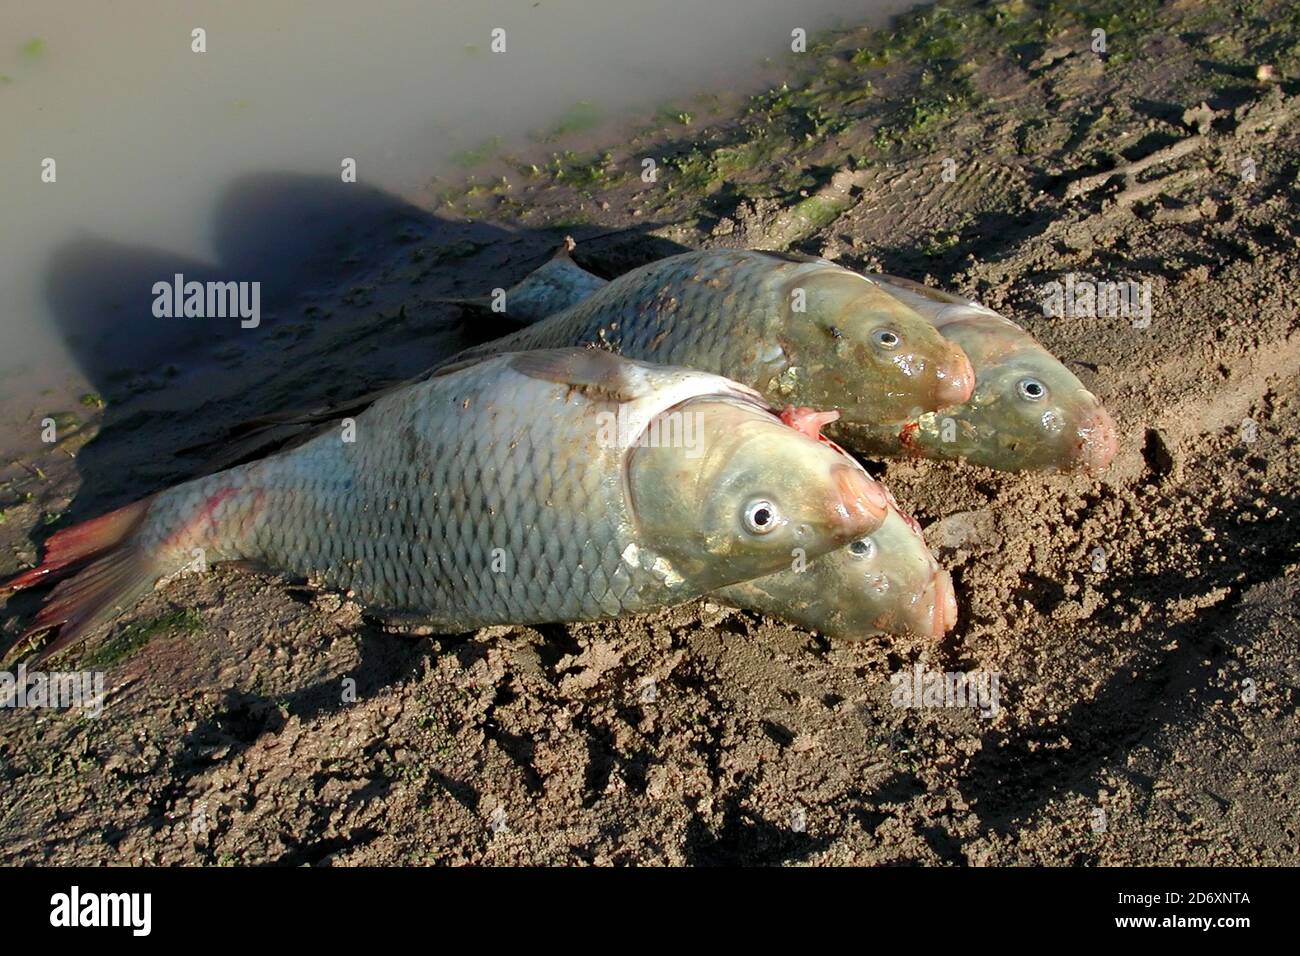 Introduced European Carp at the edge of the Darling River NSW Australia Stock Photo